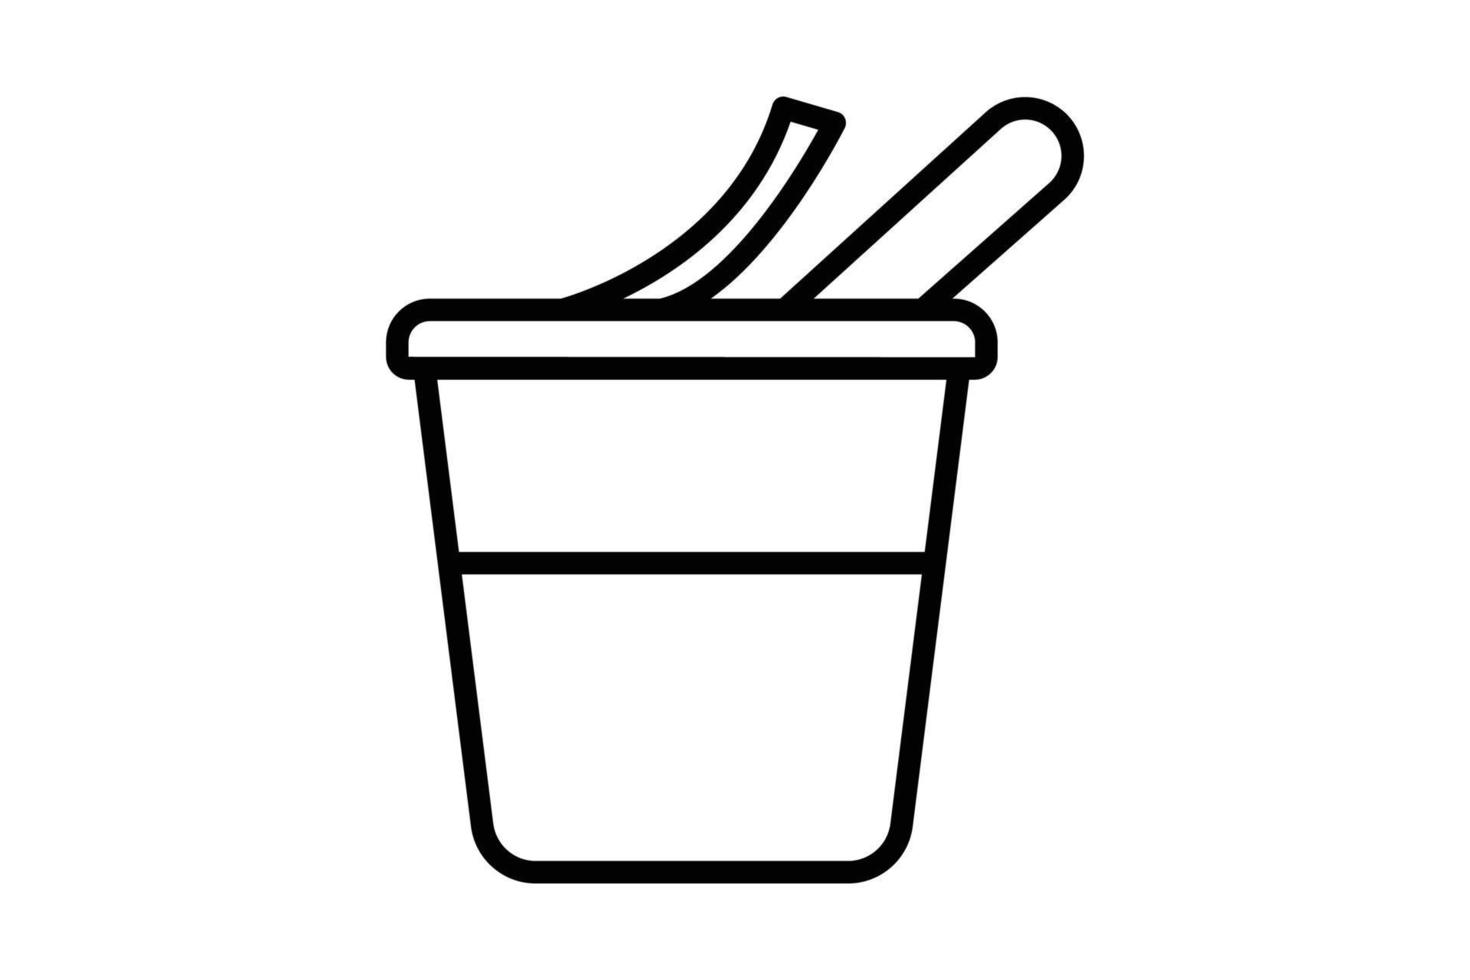 Yogurt icon illustration. icon related to cooking spices. outline icon style. Simple vector design editable